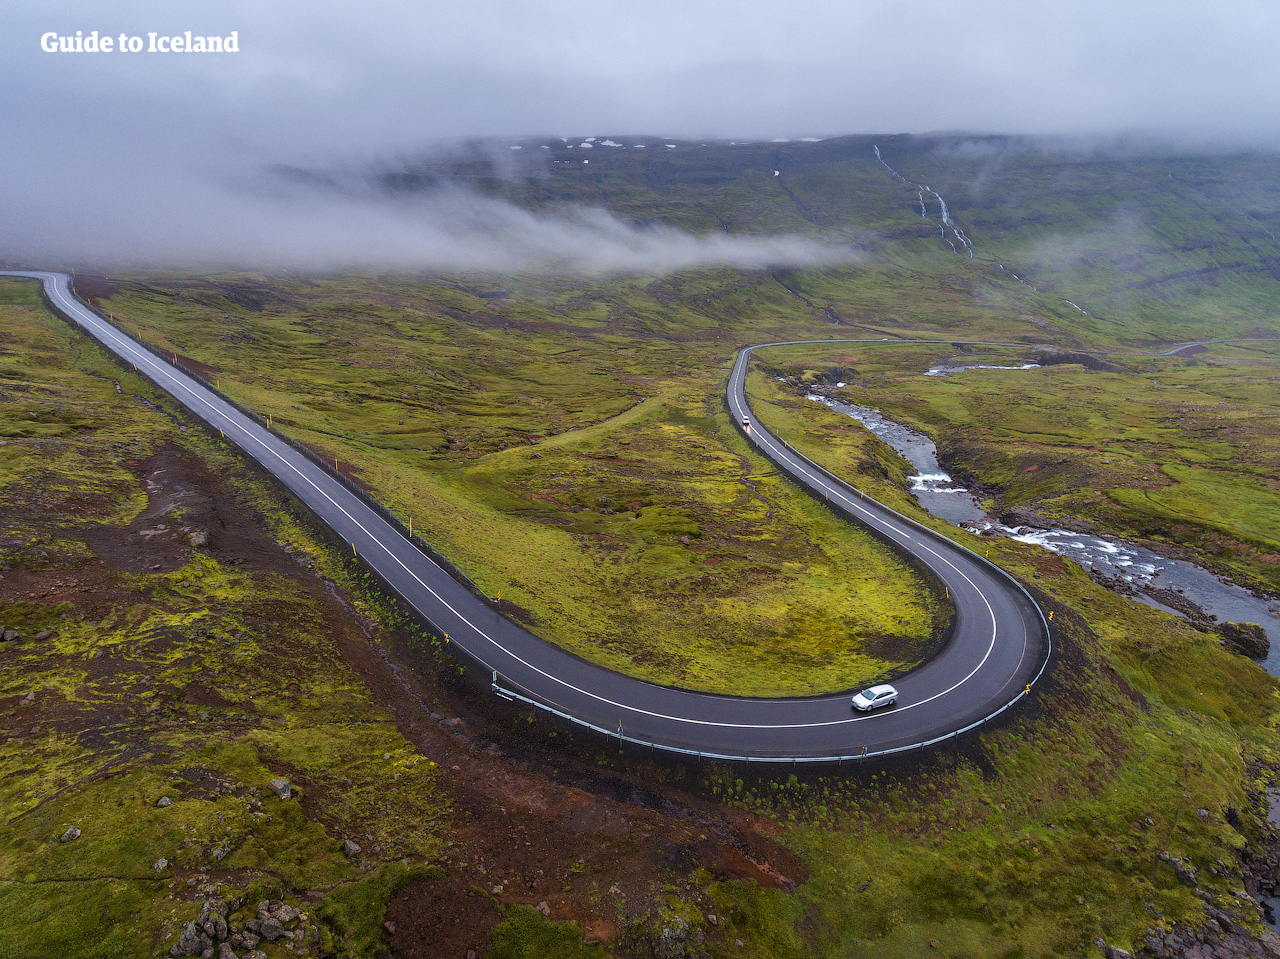 On a self-drive tour, you will have the freedom to explore Iceland at your own pace.